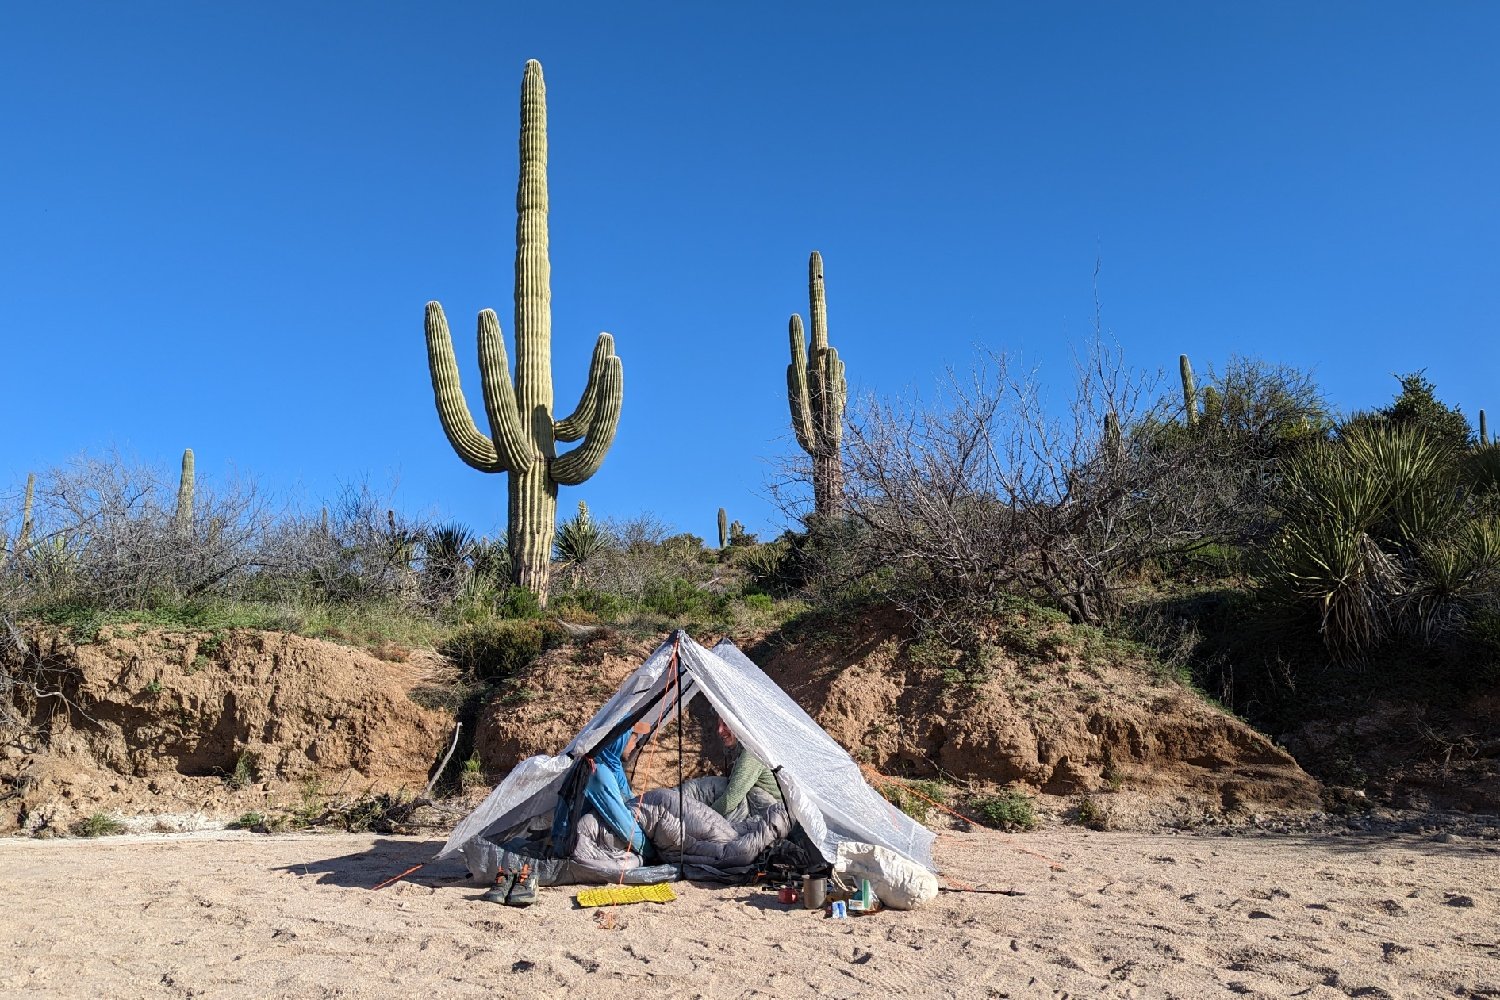 Two people sitting inside the HMG Unbound 2 tent in a desert campsite with two large saguaro cacti in the background